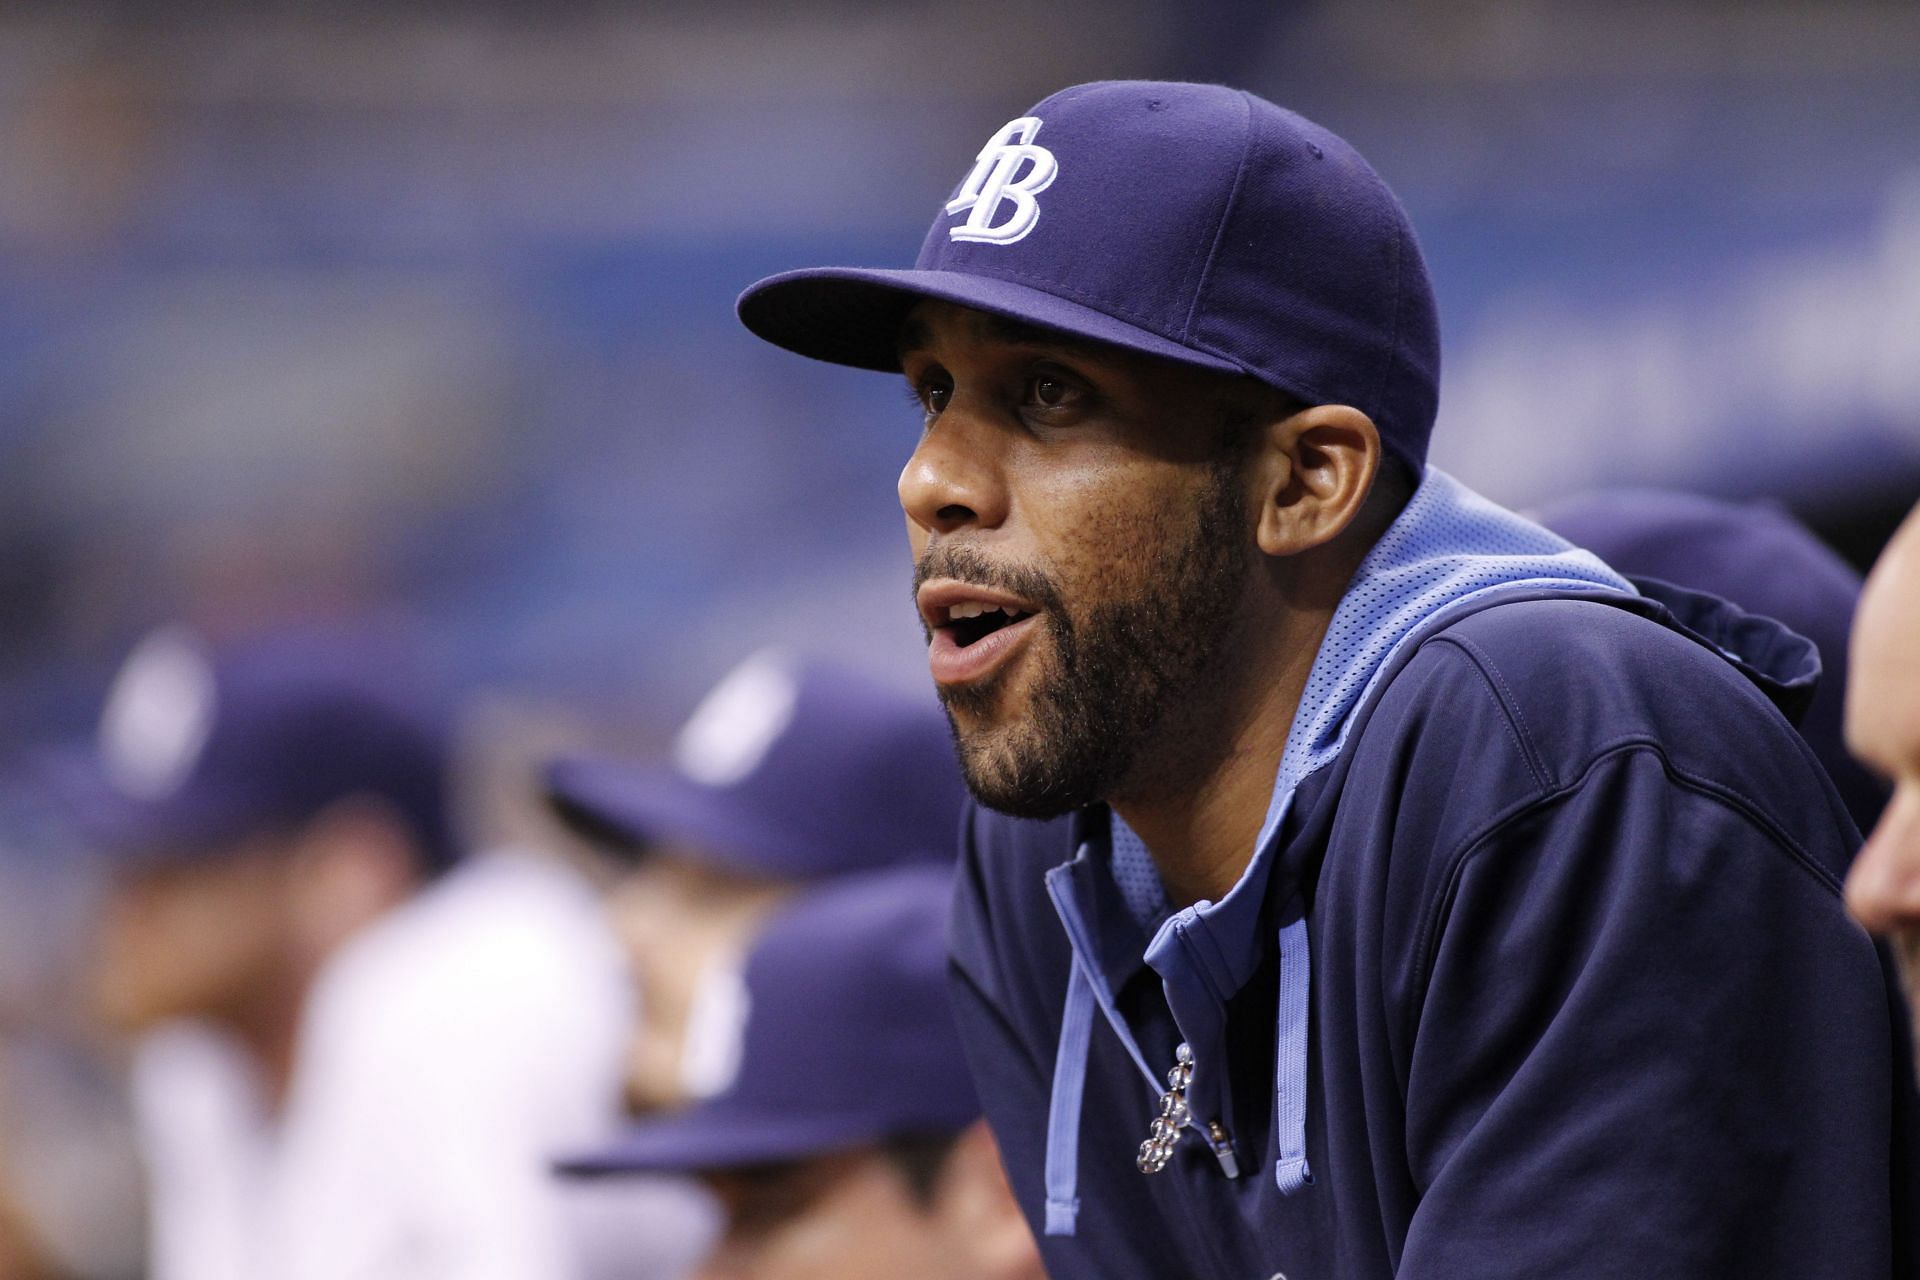 Fans will always remember Price as an integral member of the Tampa Bay Rays, where he spent 7 seasons from 2008-2014